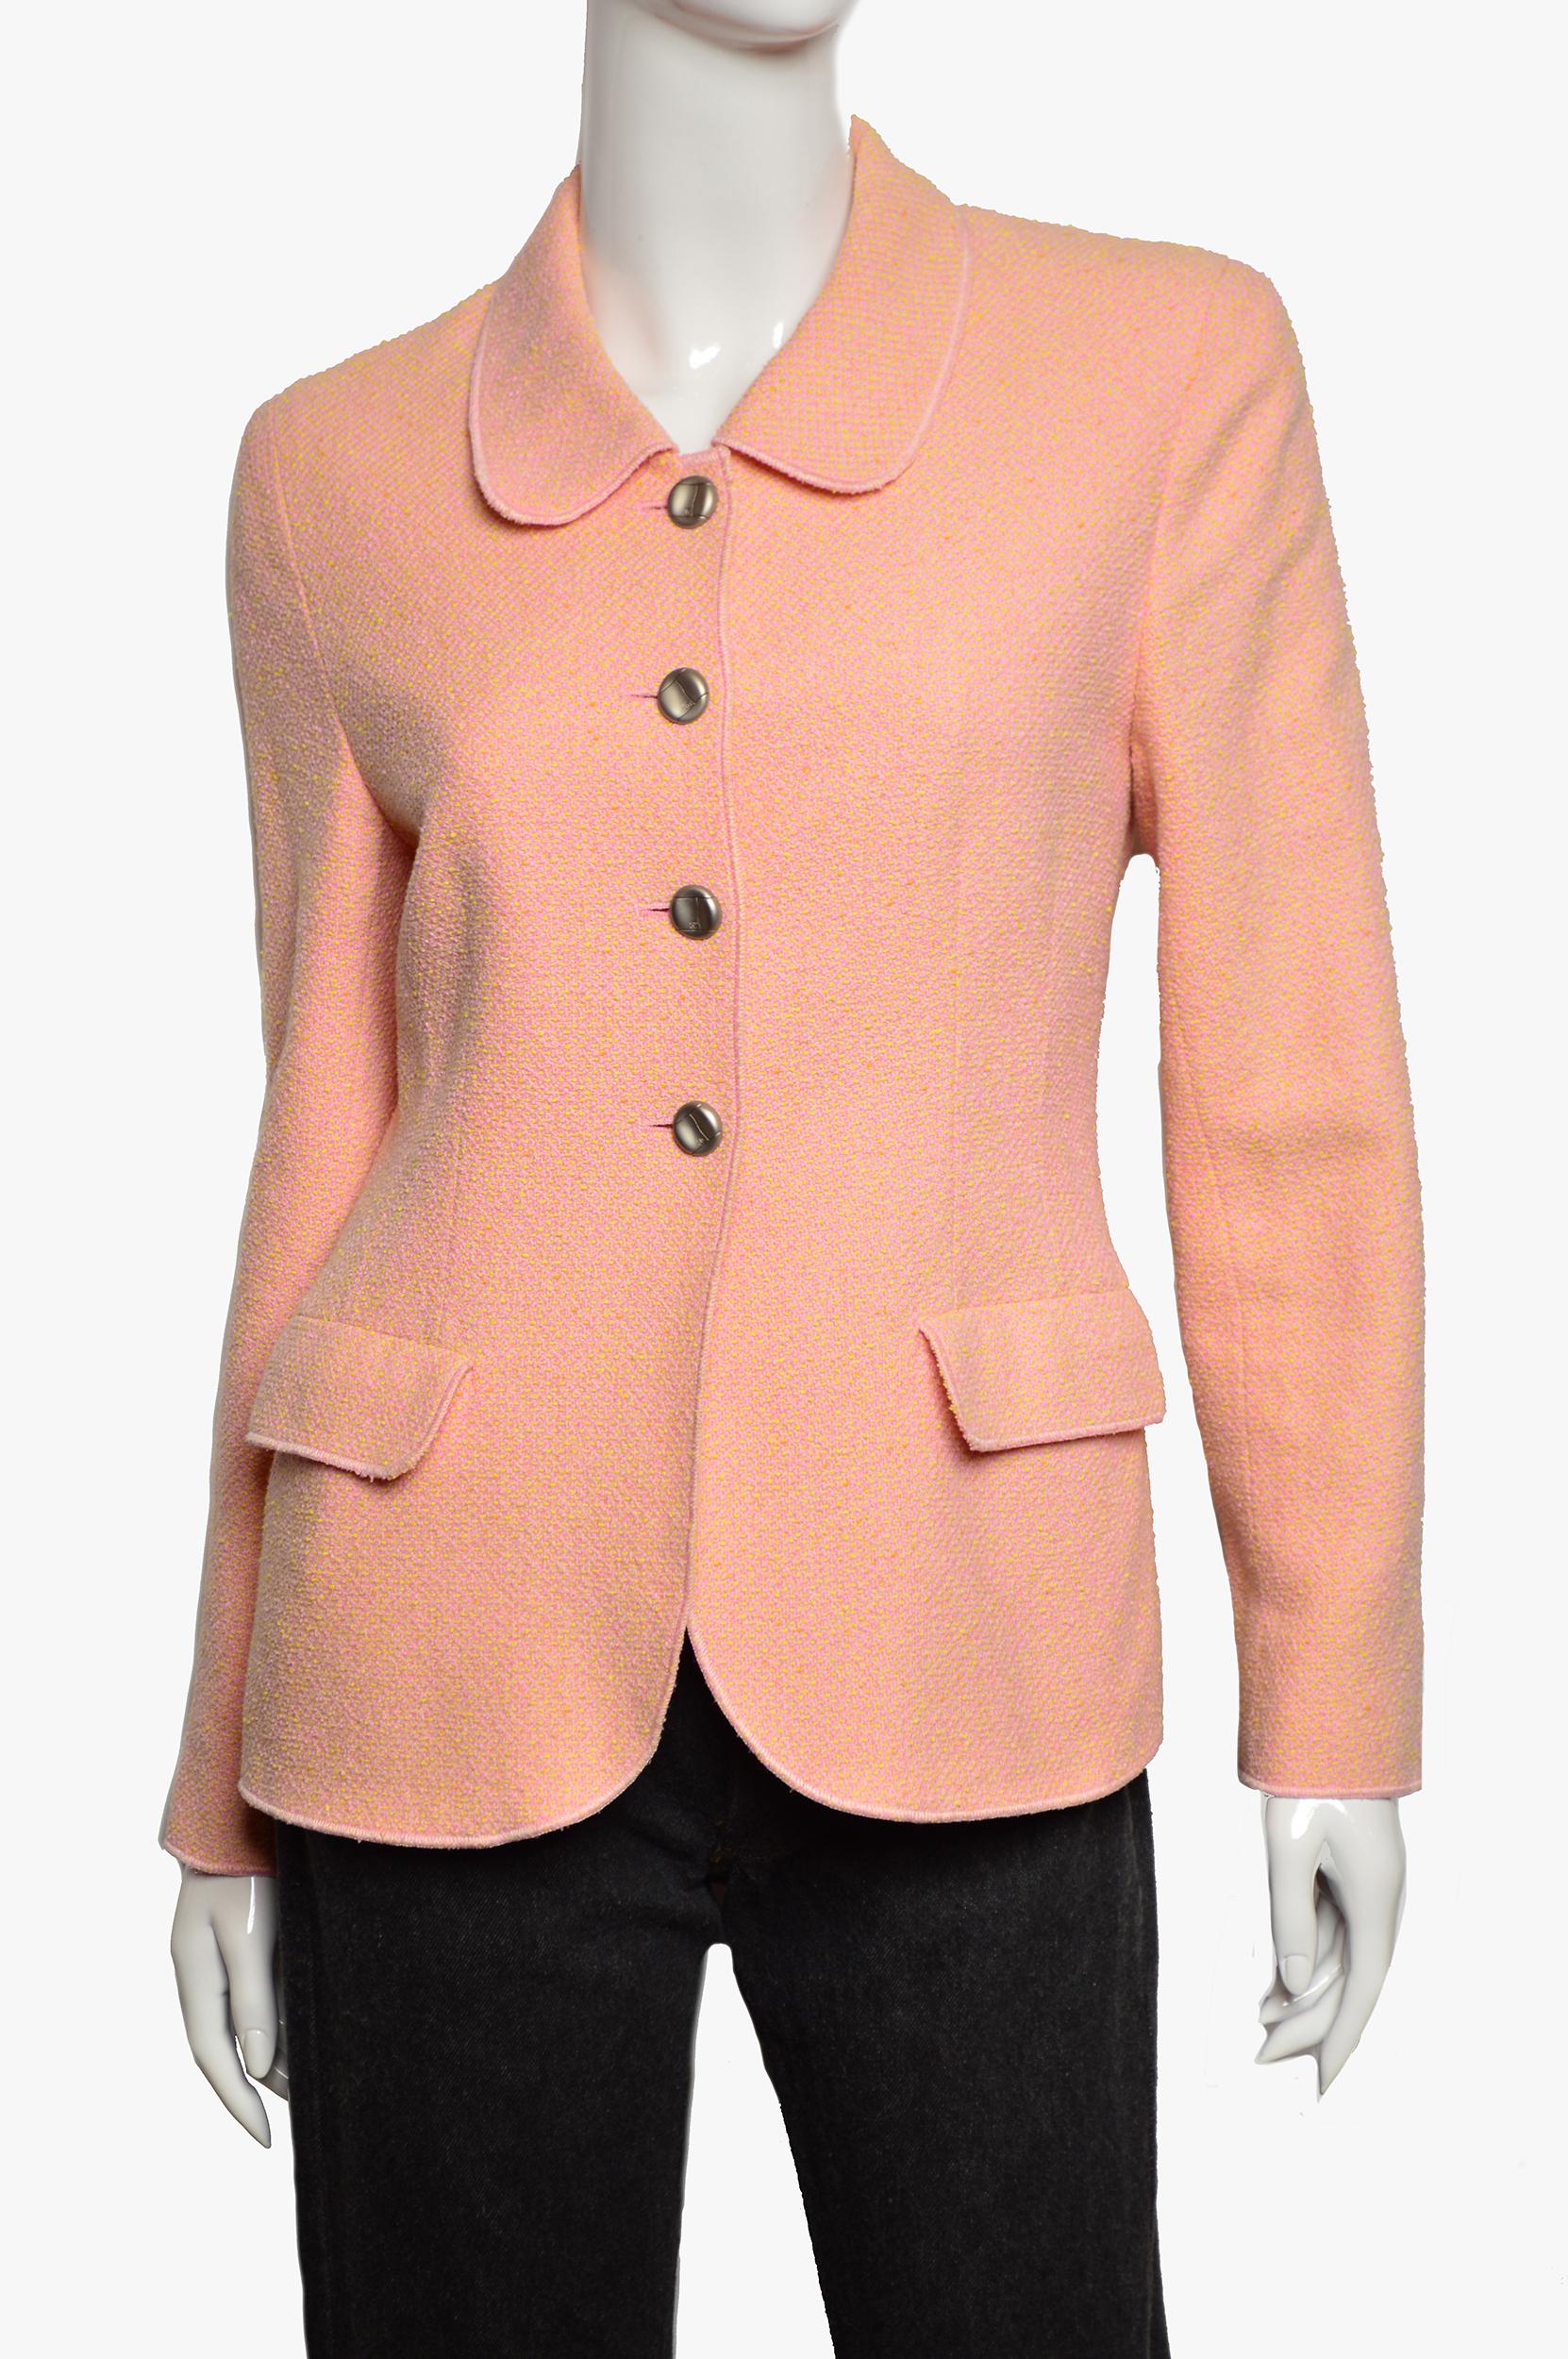 Peach vintage Chanel Boutique tweed jacket with peter pan collar, dual flap pockets at sides, silver-tone interlocking CC hardware and button closures at center front. From the Spring 1998 Collection.

Fabric: 48% Cotton, 37% Wool, 15% Nylon; Lining